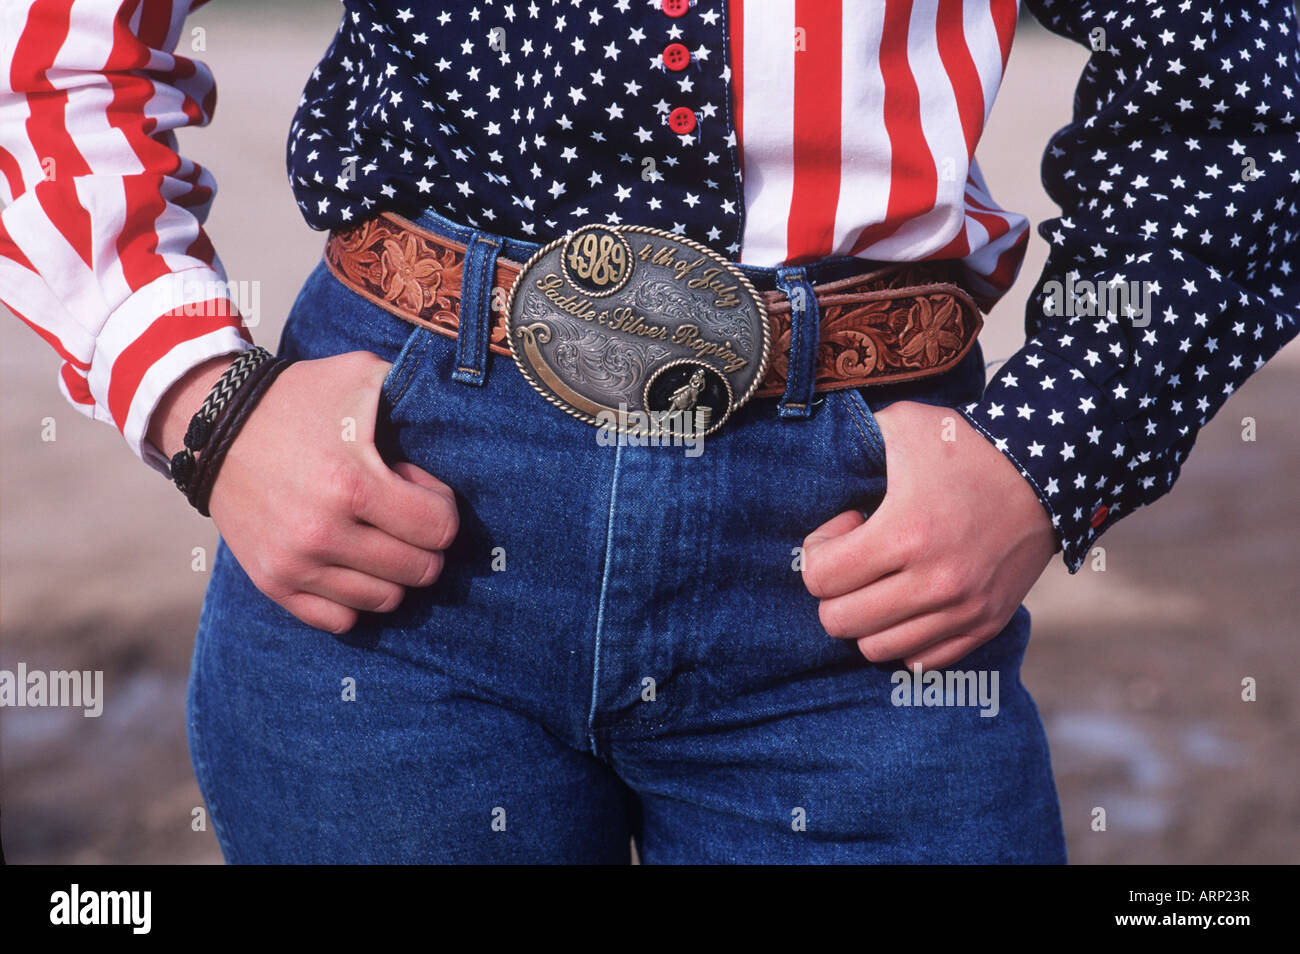 USA, cowgirl with USA shirt and champion belt buckle Stock Photo